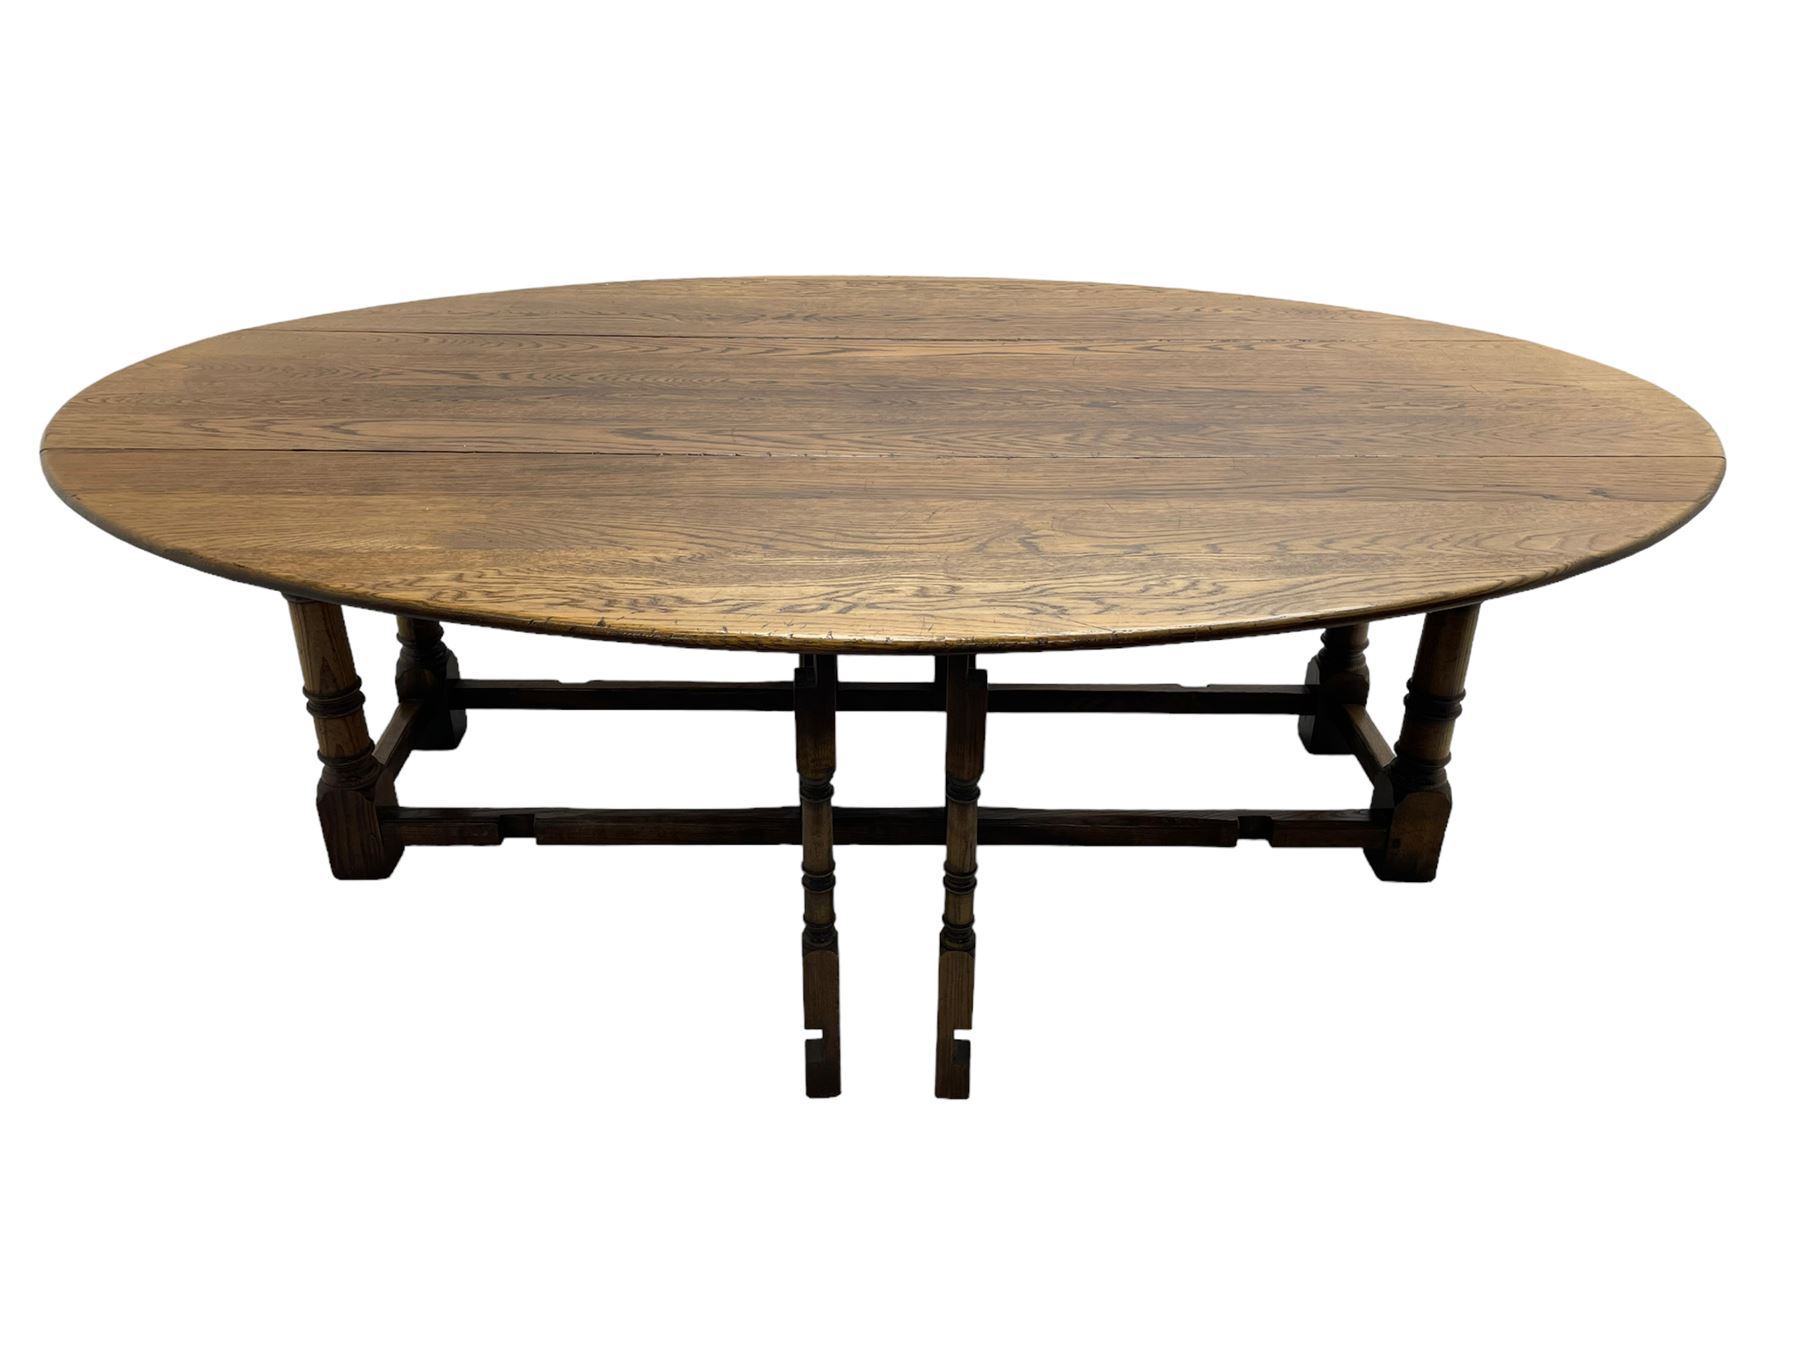 Large 18th century design oak wake or dining table - Image 7 of 12